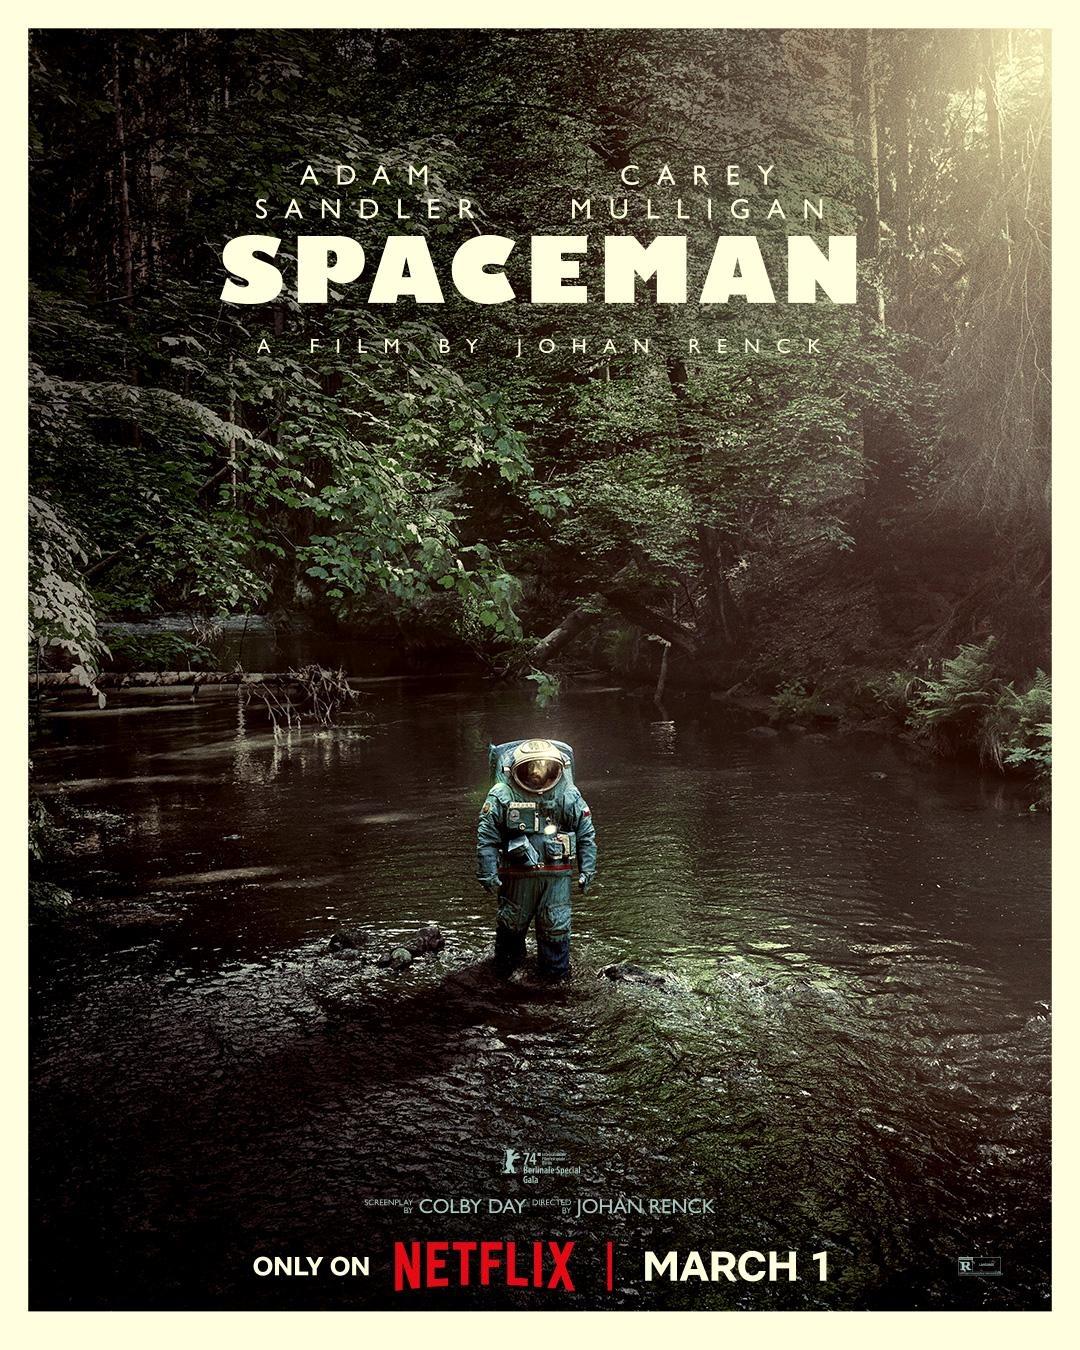 Spaceman (March 1) - Streaming on NetflixSpaceman, based on Jaroslav Kalfar's novel, stars Adam Sandler as astronaut Jakub Prochazka. Tasked with a mission at the solar system’s edge, Jakub’s personal and professional life spirals. A mysterious creature aboard his spacecraft becomes an unlikely ally, guiding him through cosmic dilemmas and earthly troubles. The film blends science fiction with deep human themes, exploring the vastness of space and the intricacies of human connection. It also stars Carey Mulligan and Paul Dano.